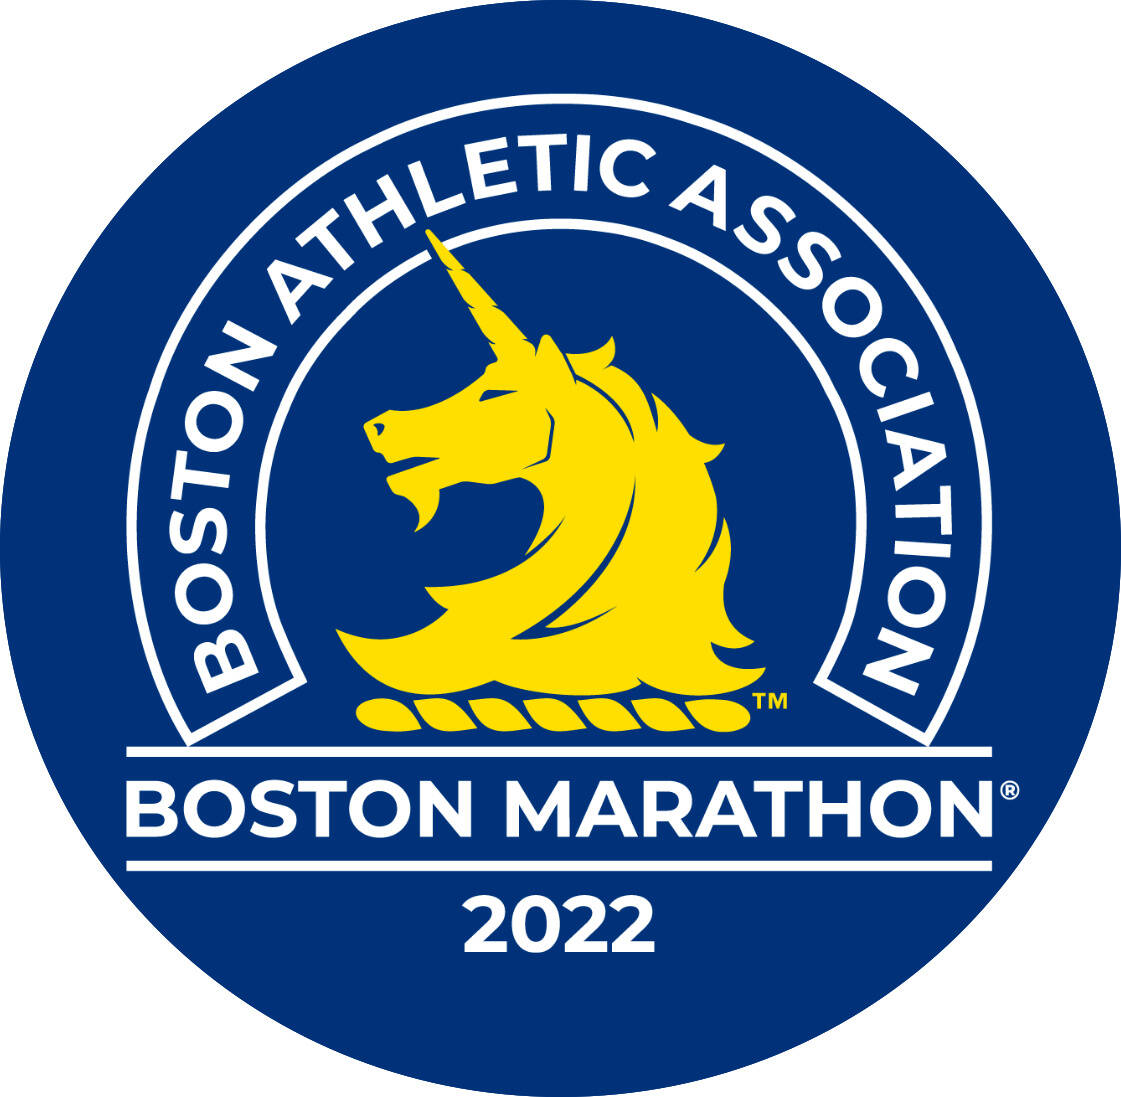 From the Boston Athletic Association website